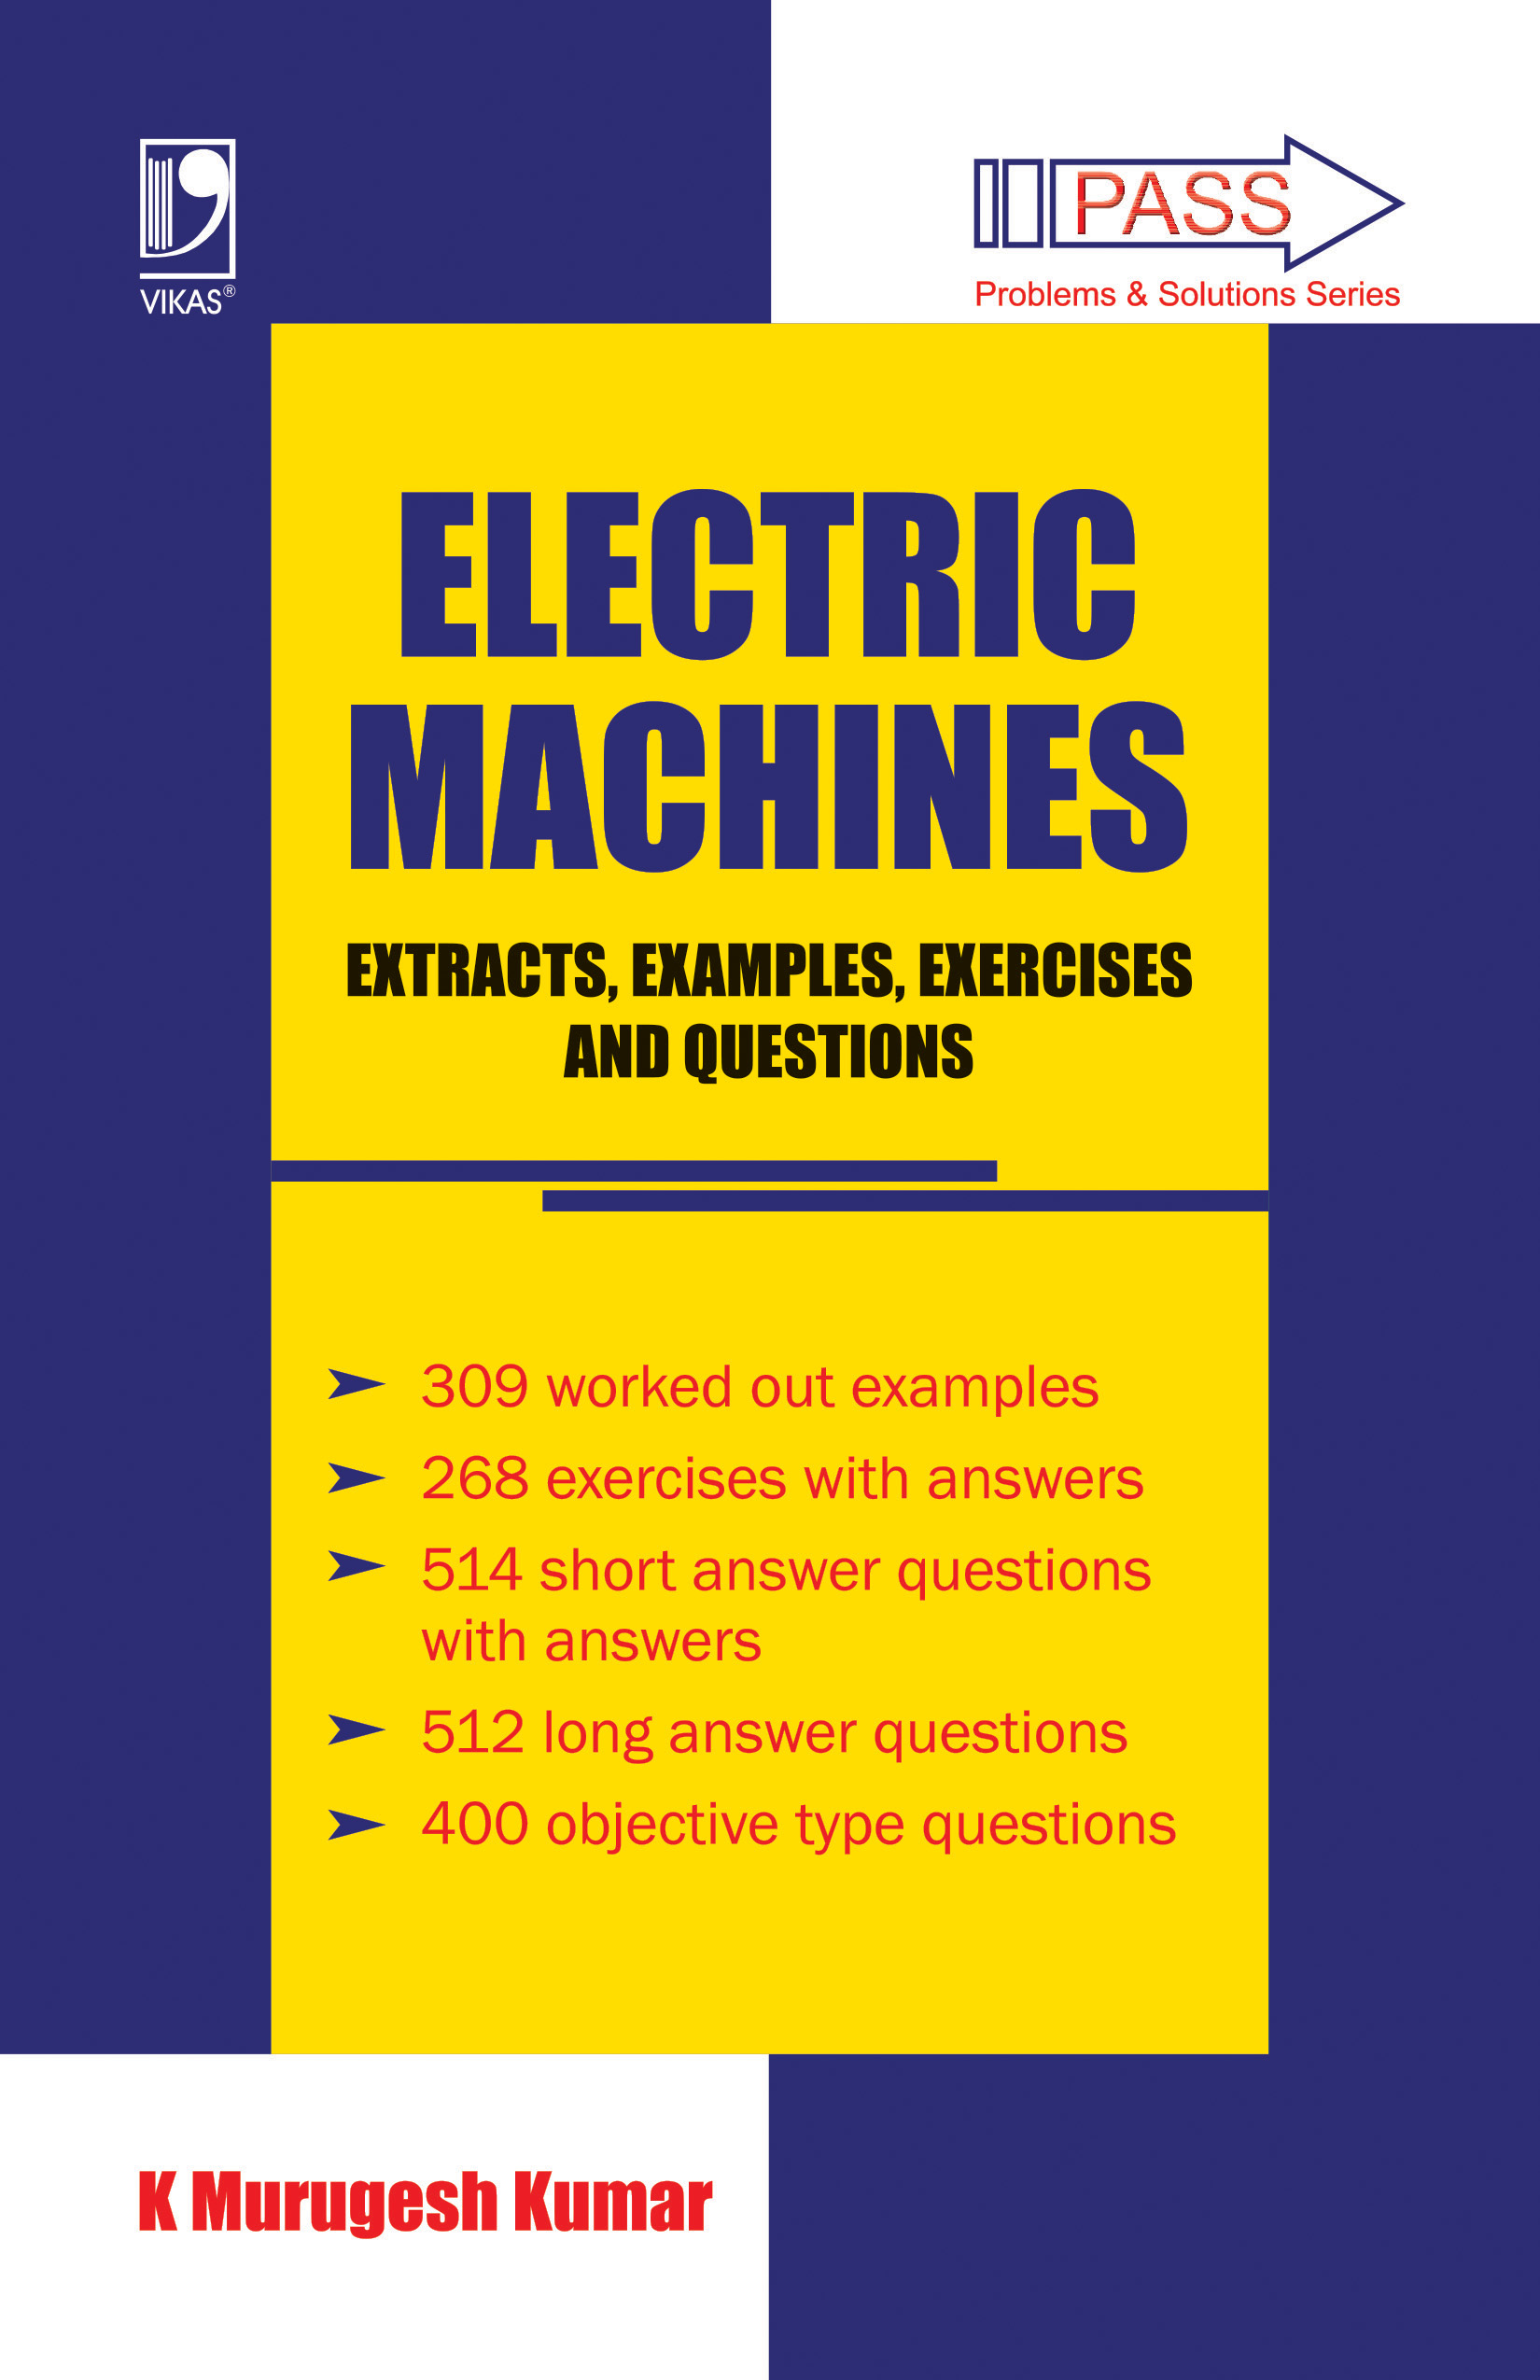 Electric Machines Extracts Examples Exercises and Questions